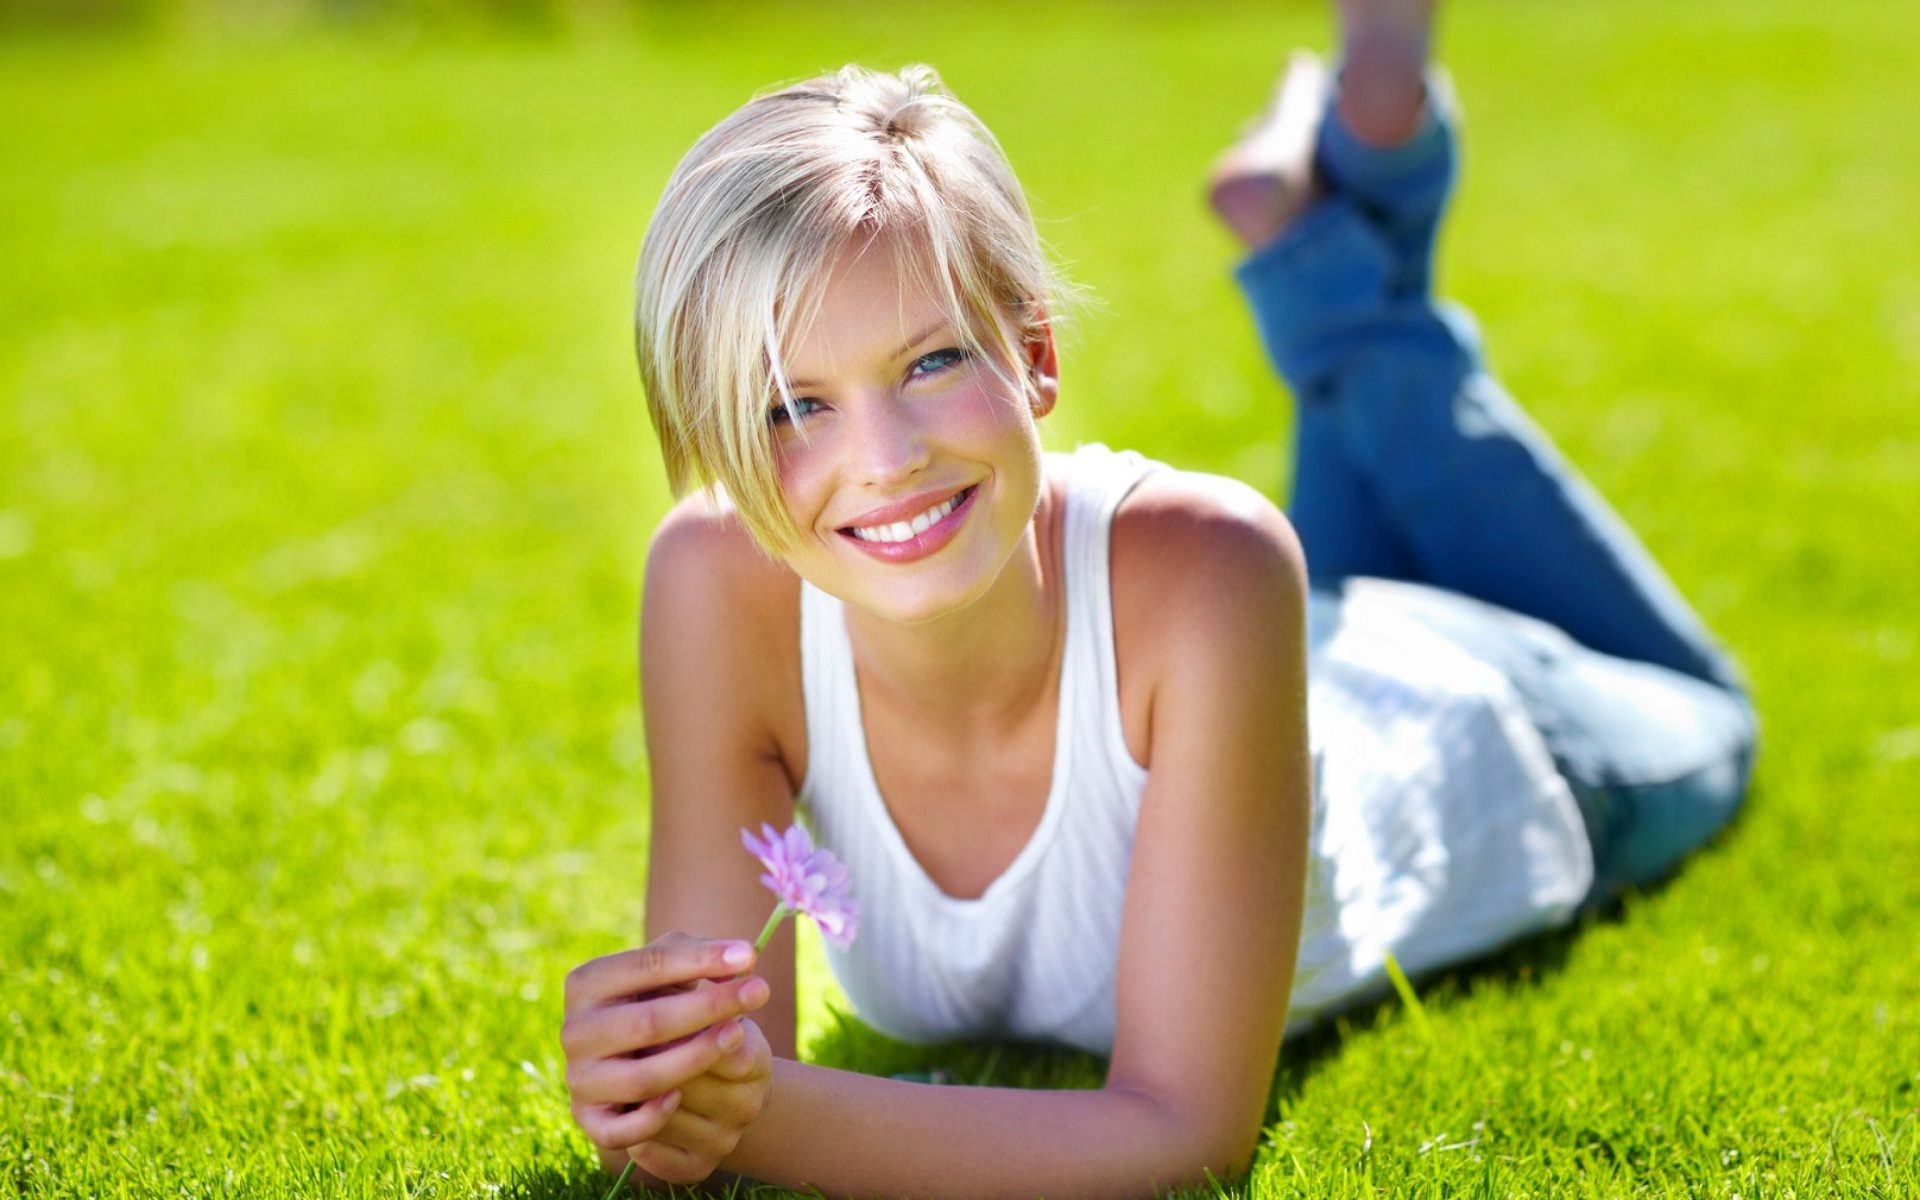 beautiful smile wallpapers,people in nature,grass,facial expression,water,lawn